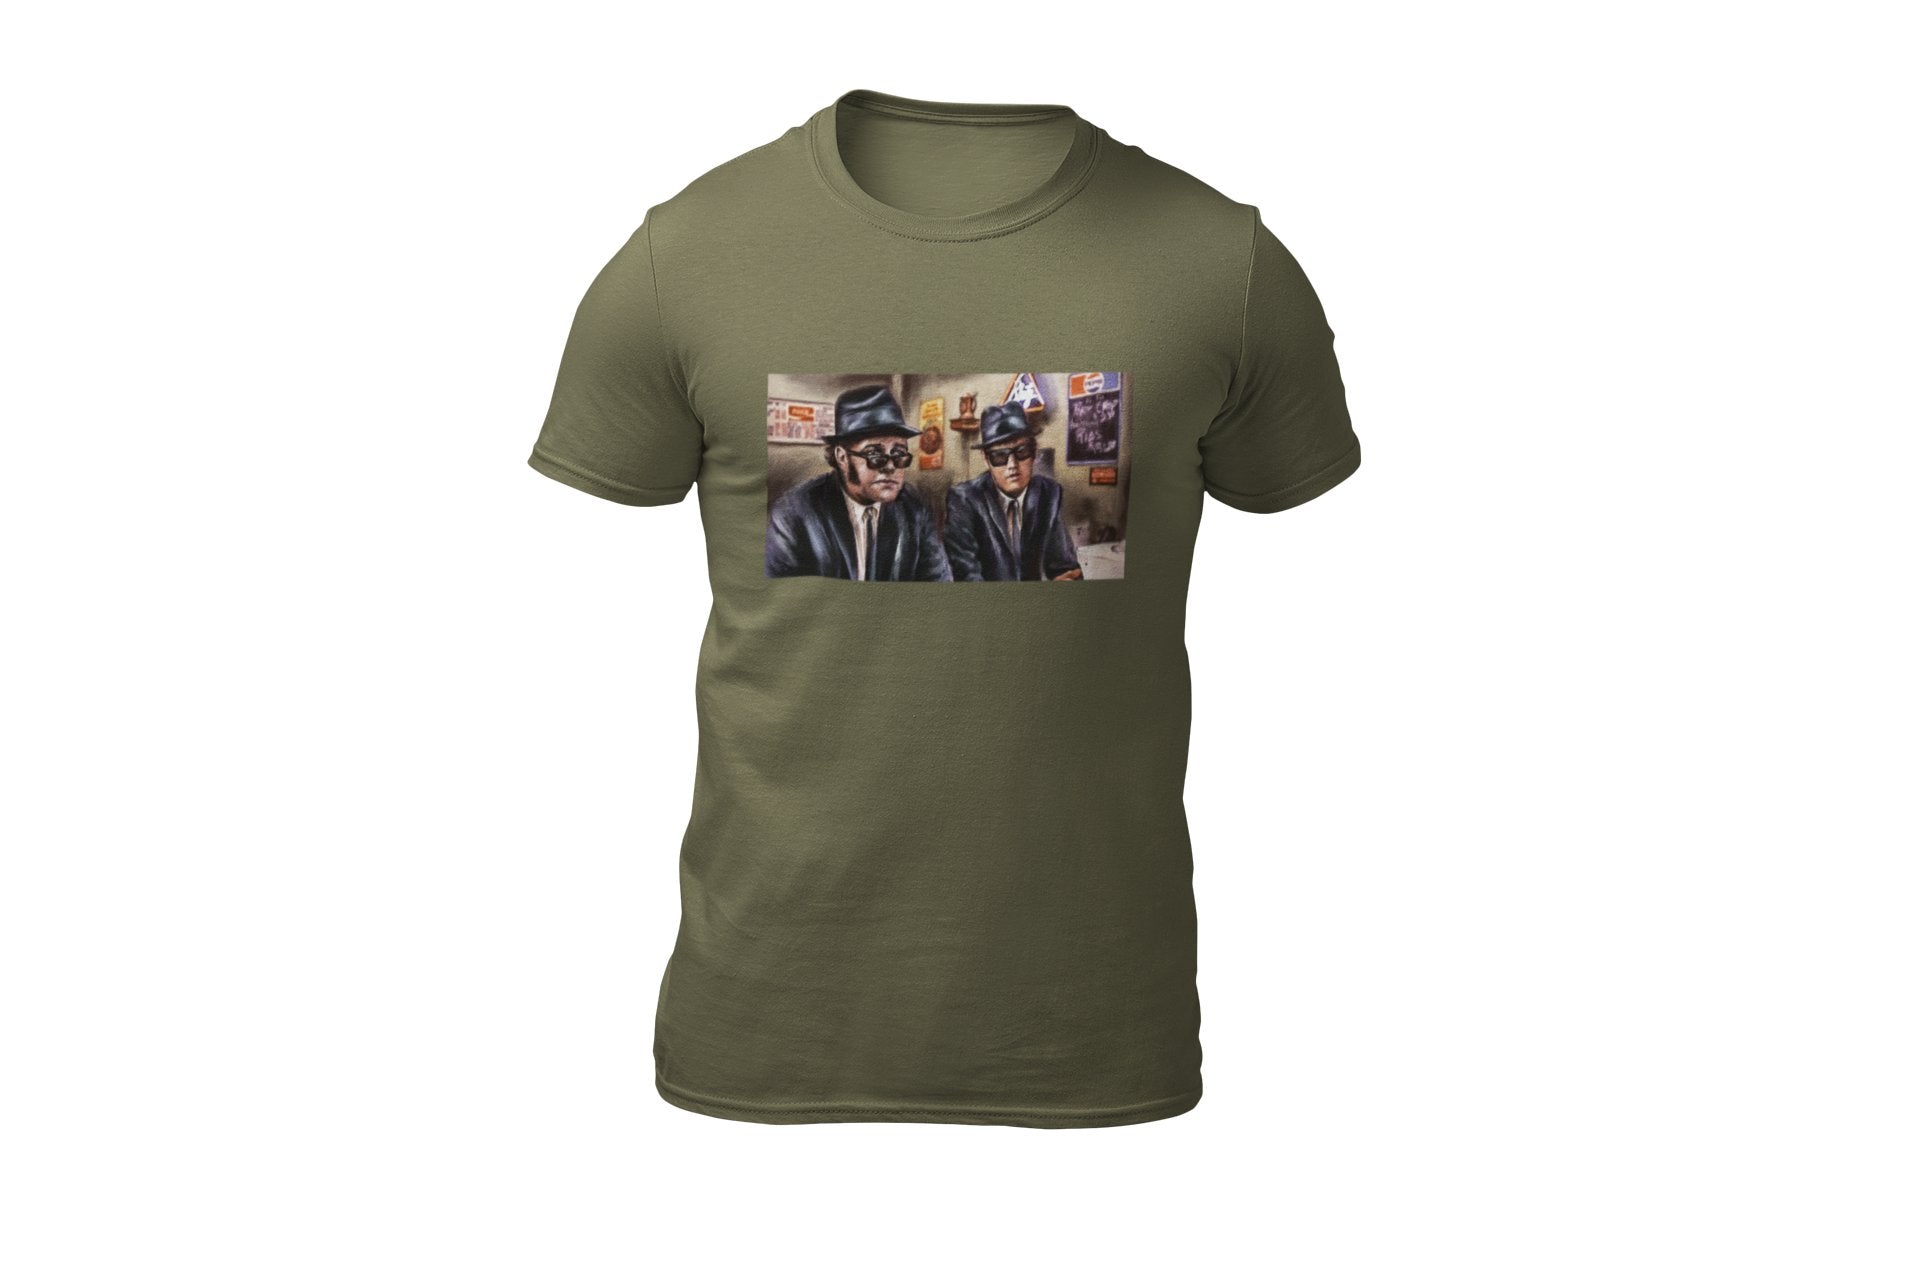 Bomb Brothers | Unisex T-shirt - Androo's Art